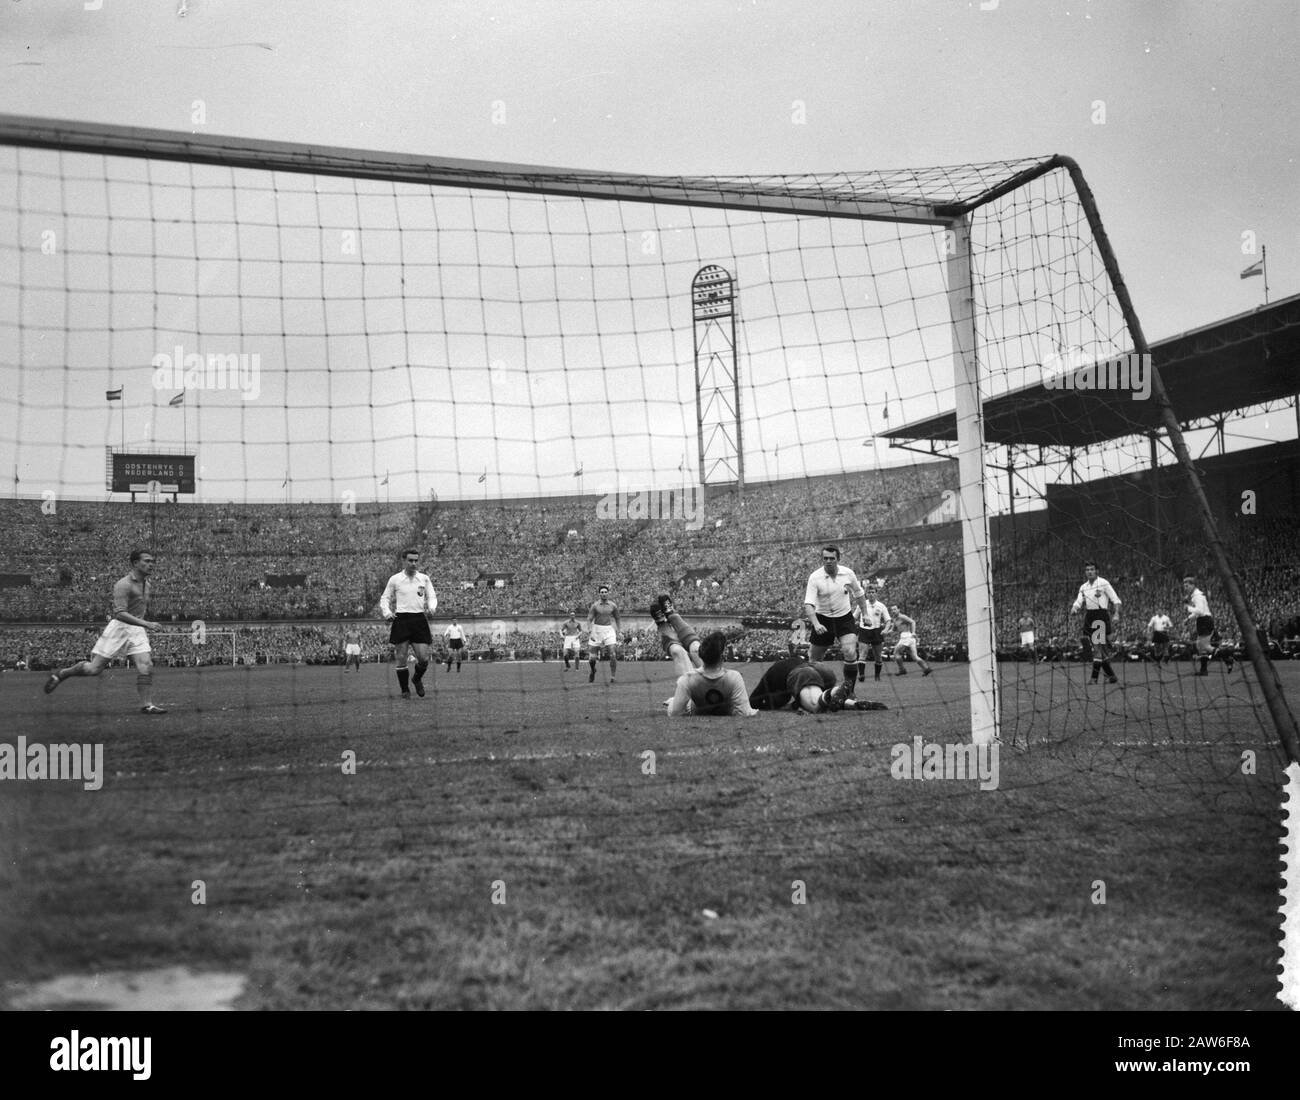 Netherlands against Austria 1-1, game time from left to right: Lenstra, Schmied, Happel, Hanappi, Rijvers Date: September 25, 1957 Keywords: sport, football person Name: Lenstra, Abe, Rijvers, Kees Stock Photo